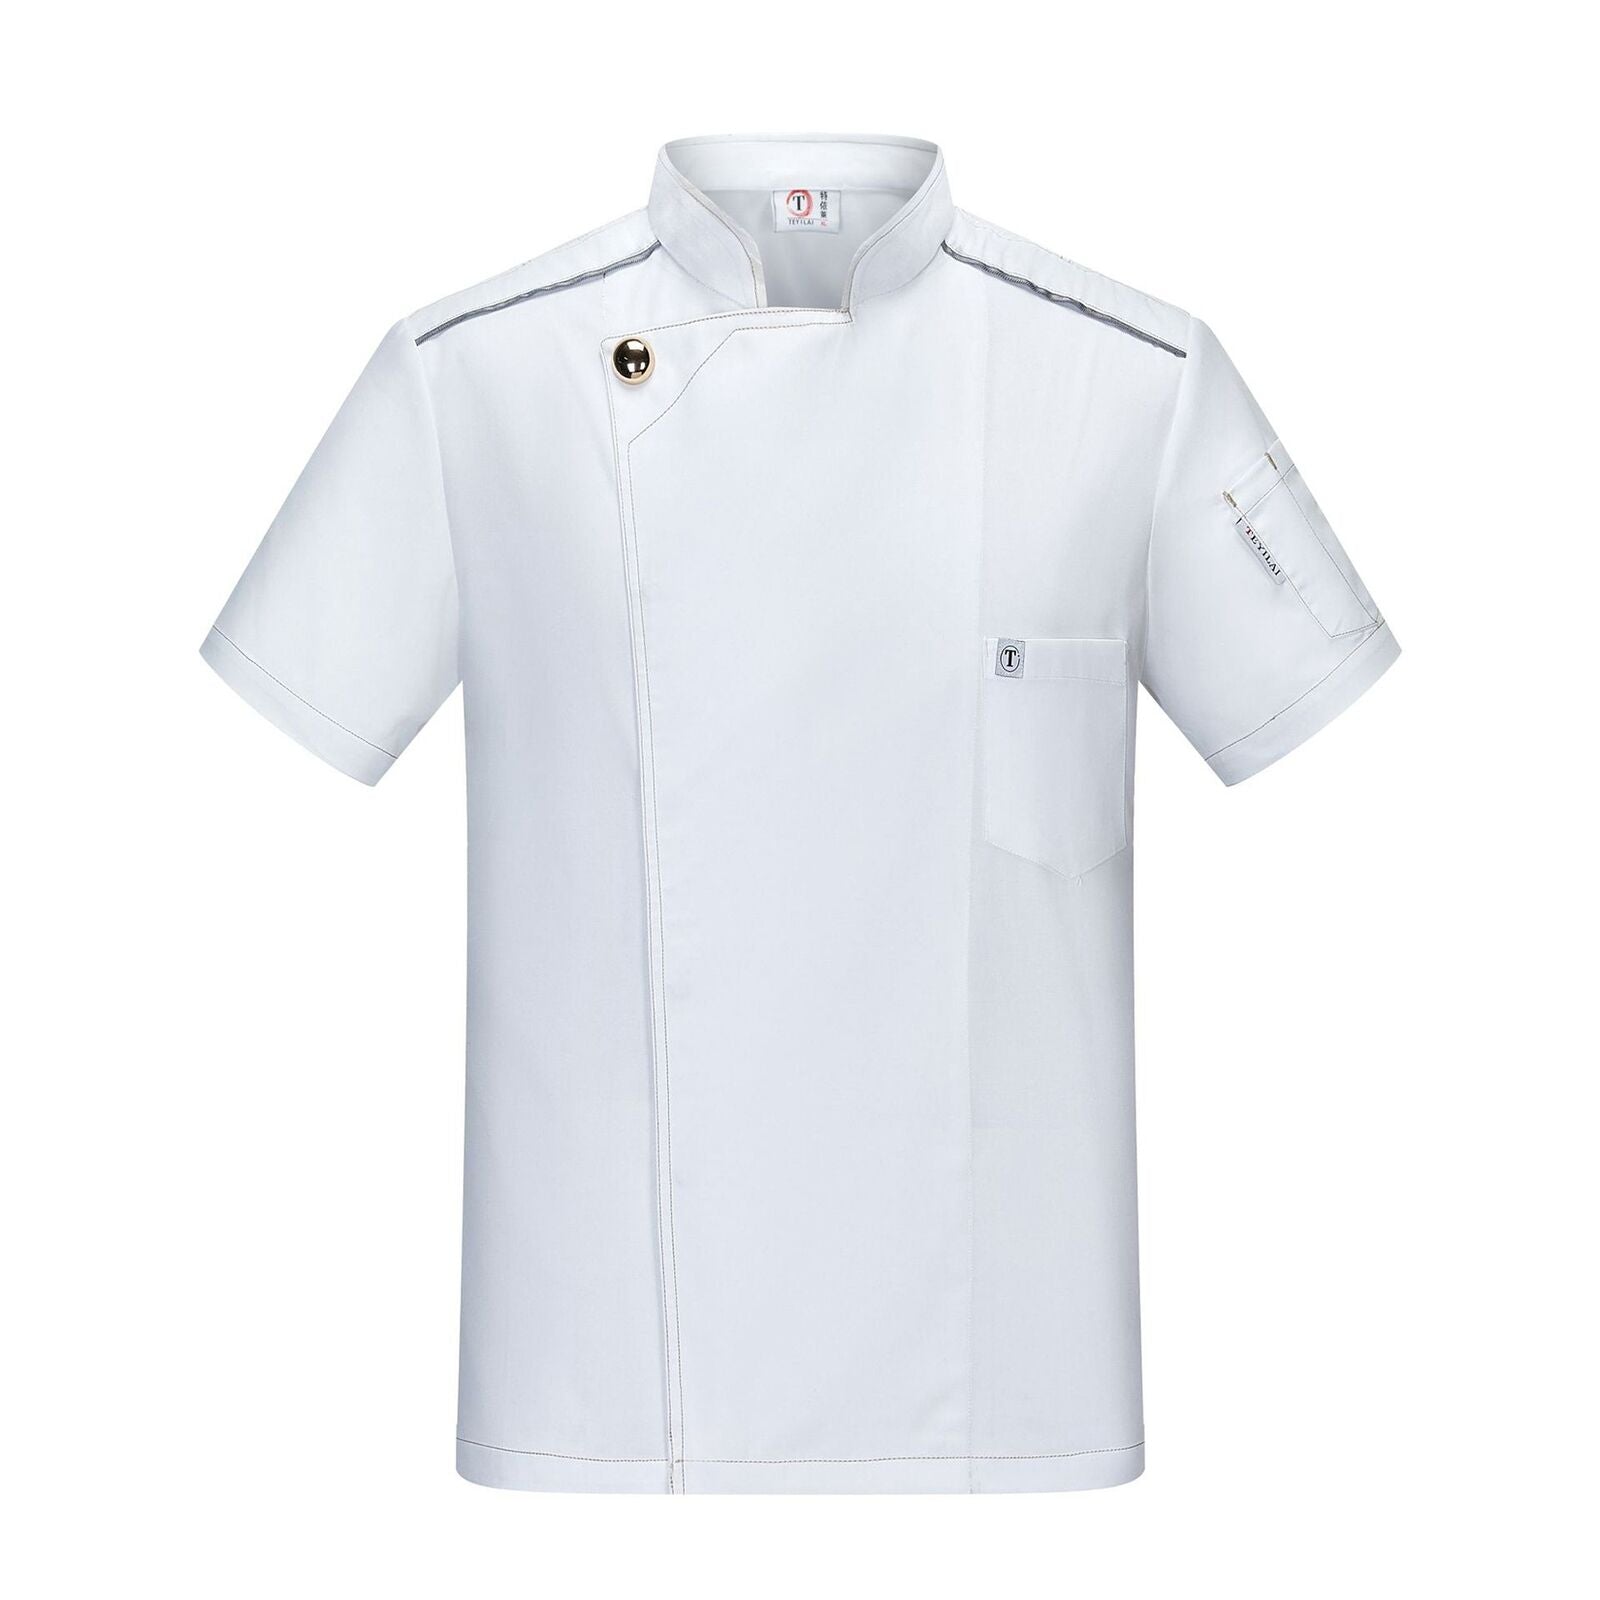 Kitchen Master Cook Uniform Tops Chef Jacket for Men and Women